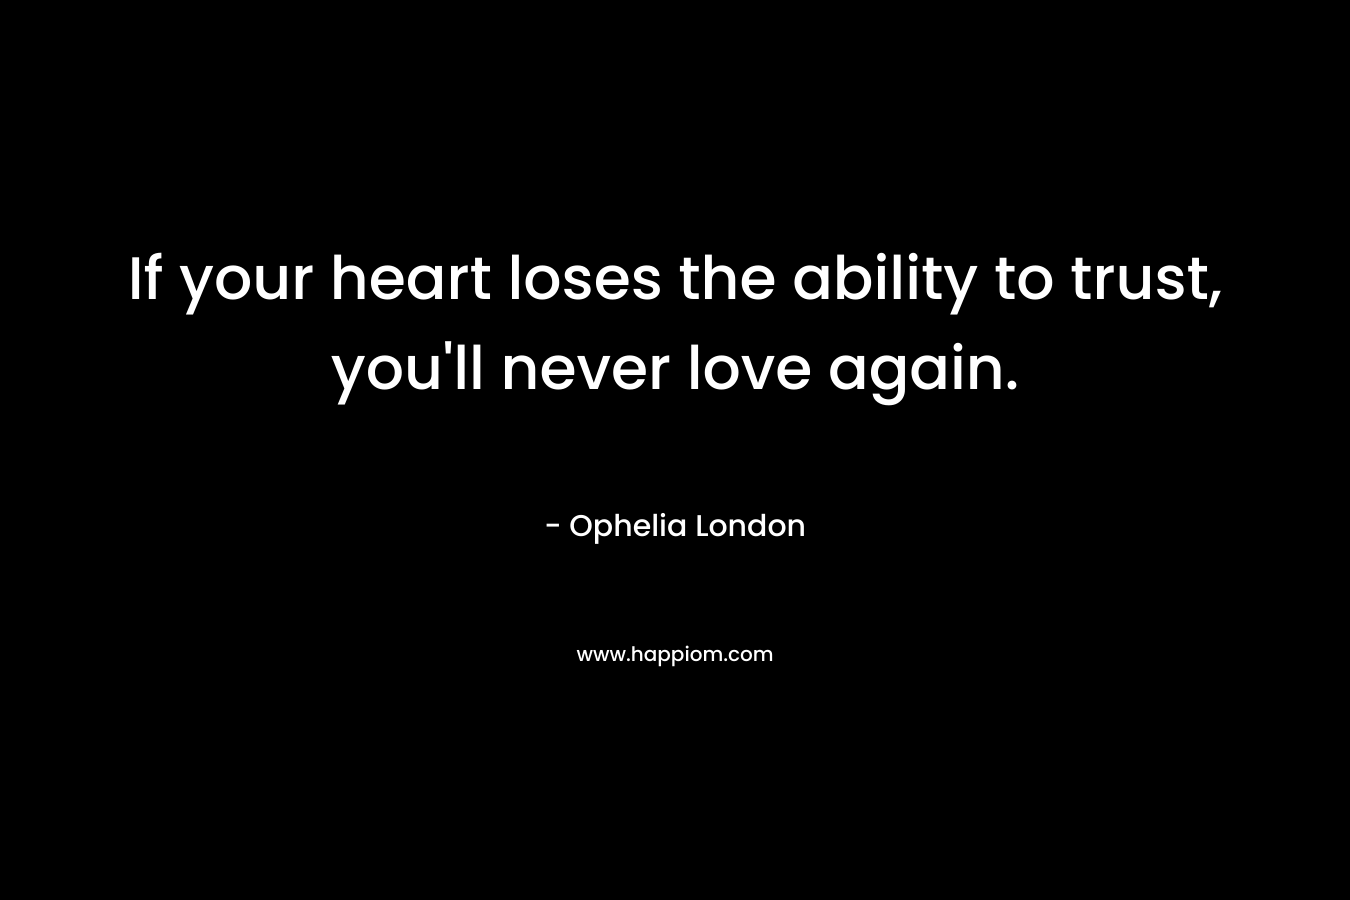 If your heart loses the ability to trust, you'll never love again.